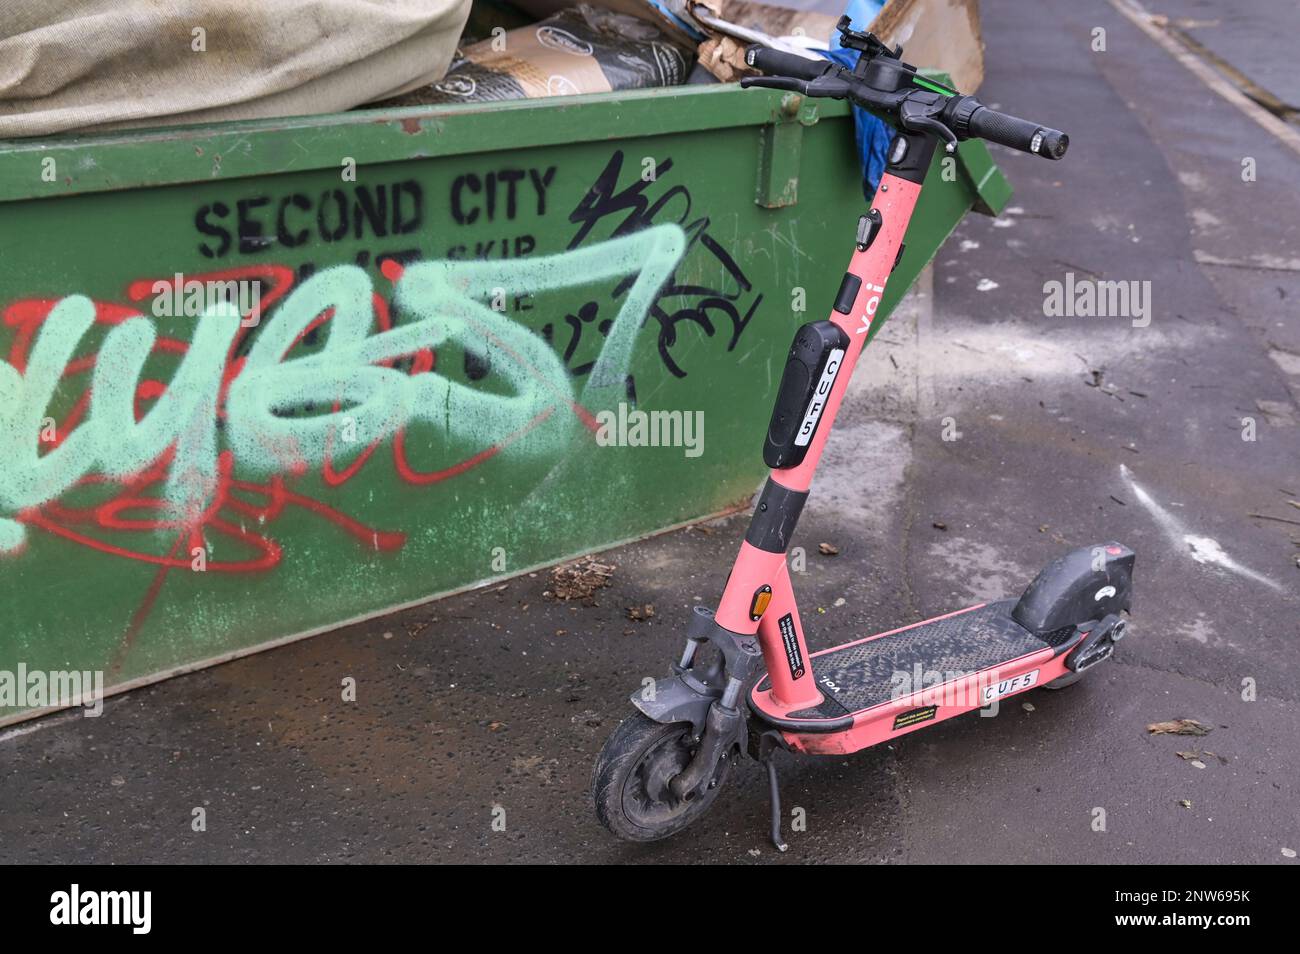 Birmingham, 28th February 2023 - A Voi electric scooter dumped next to a Second City skip in Birmingham - Voi Scooters, the only available hire scooter company in Birmingham will be shutting down their operations on Tuesday 28th February at 11pm. The electric scooters were already thin on the ground in England's Second City after the company said they would be removing the vehicles over the next few weeks. The company ran hire scooters for a trial period but have decided not to continue with the contract and no other company have stepped up to fill the vacancy. Despite calls from local authori Stock Photo